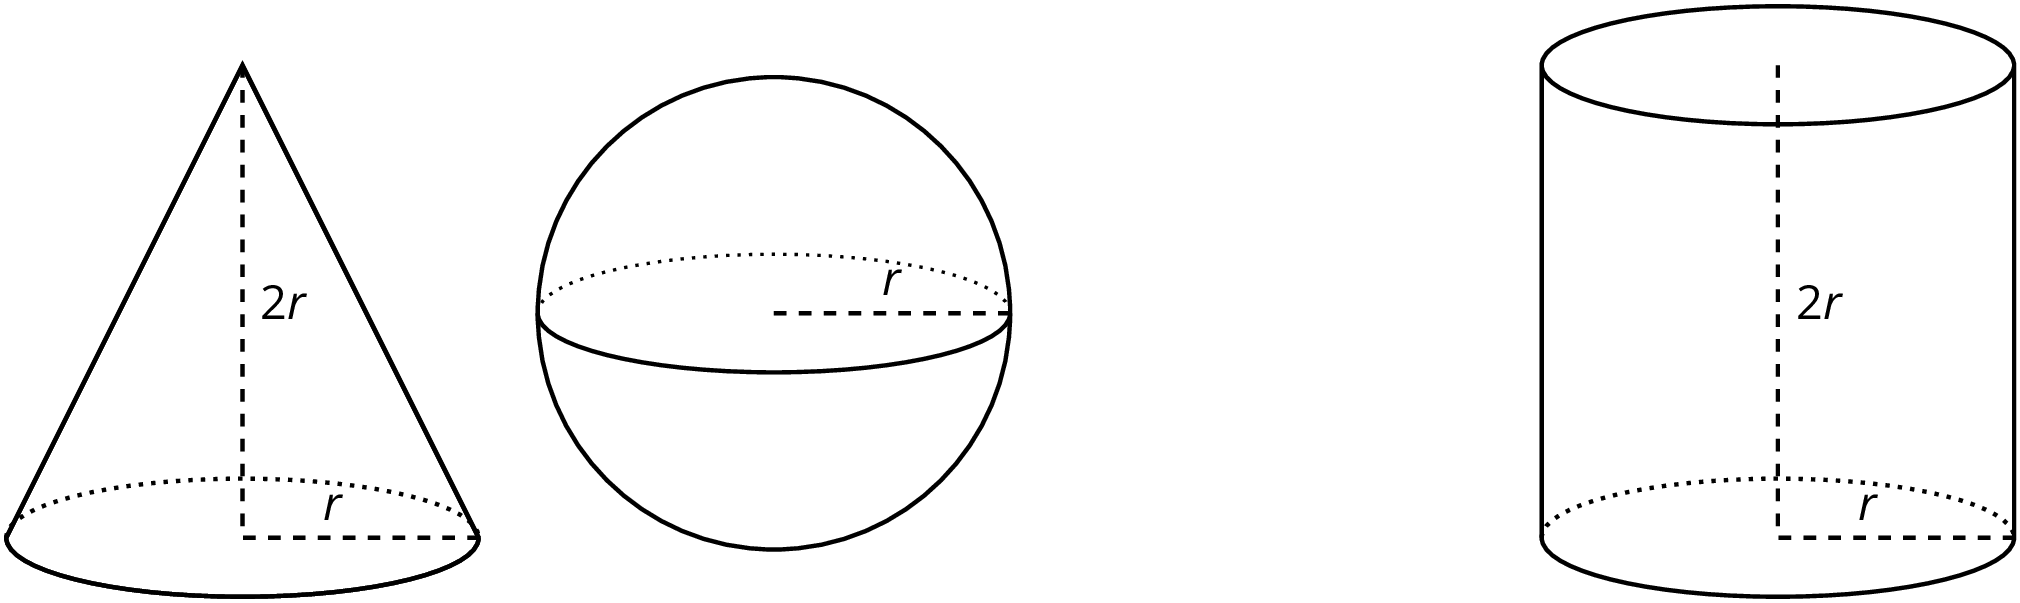 A cone, a sphere and a cylinder. The height of the cone is labeled "2 r" and the radius of the cone is labeled "r." The radius of the sphere is labeled "r." The height of the cylinder is labeled "2 r" and the radius of the cylinder is labeled "r."